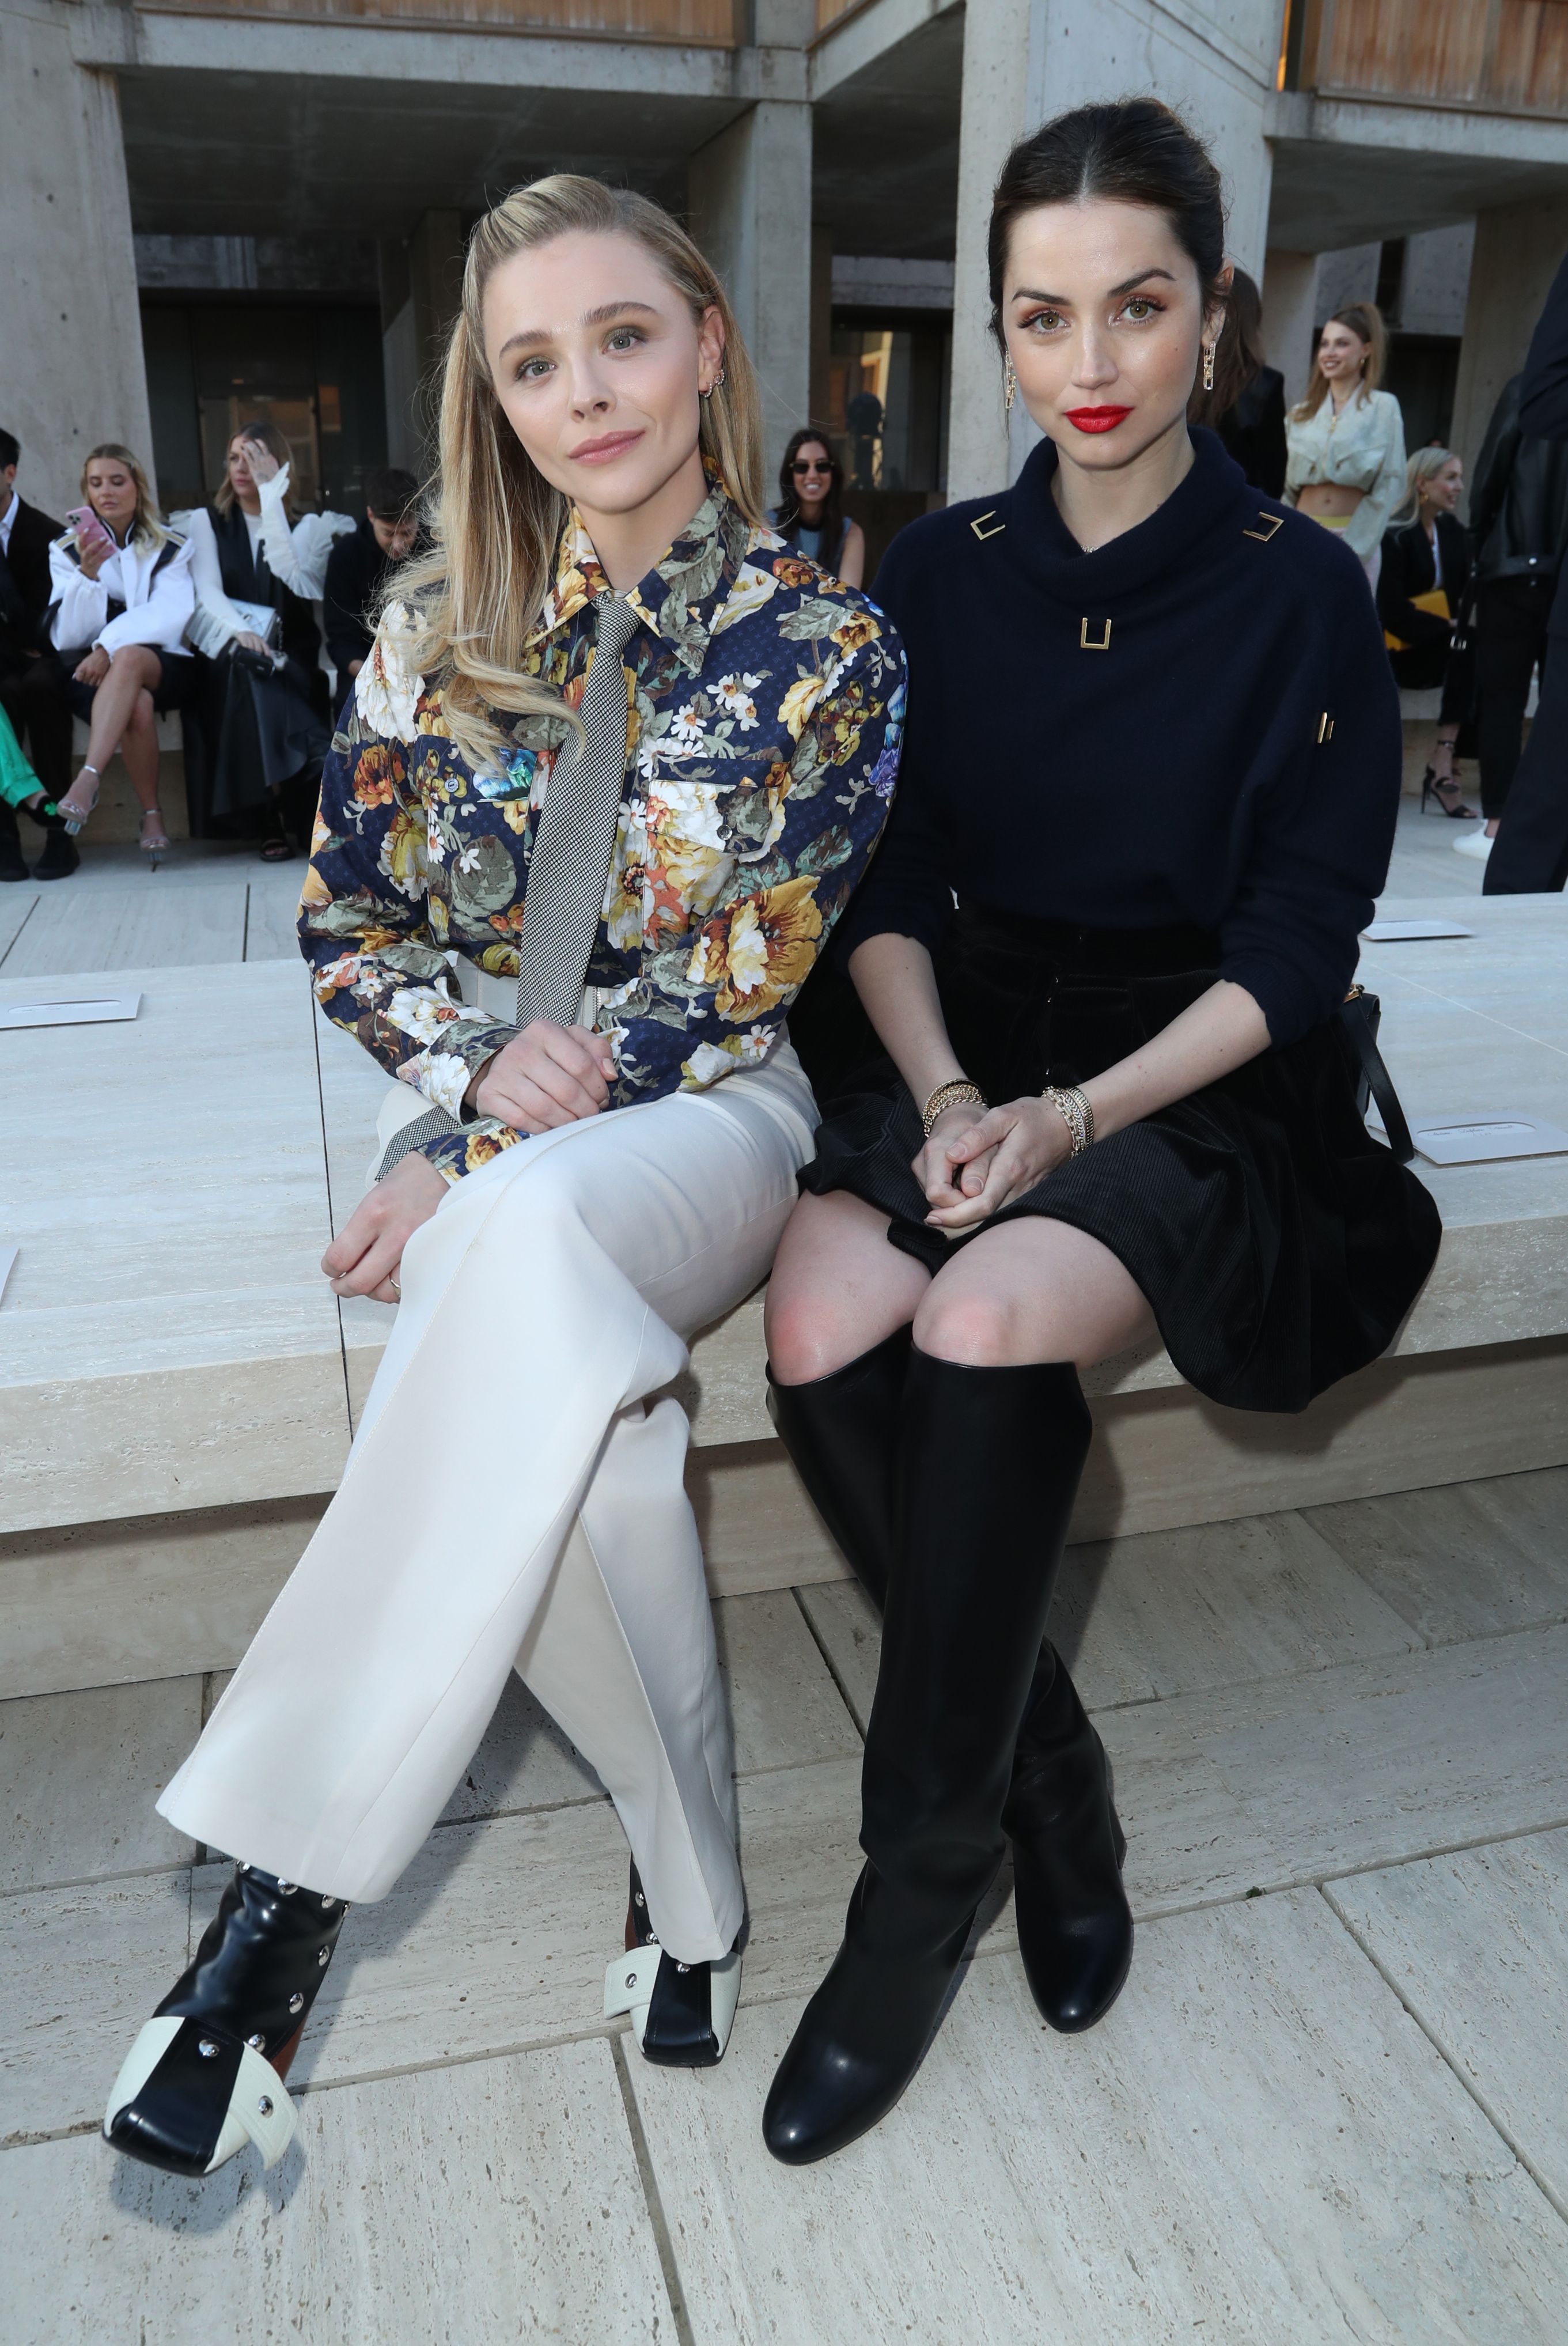 Ana de Armas Daily on X: ana de armas and chloë grace moretz at the louis  vuitton 2023 cruise show in san diego (may 12, 2022)   / X